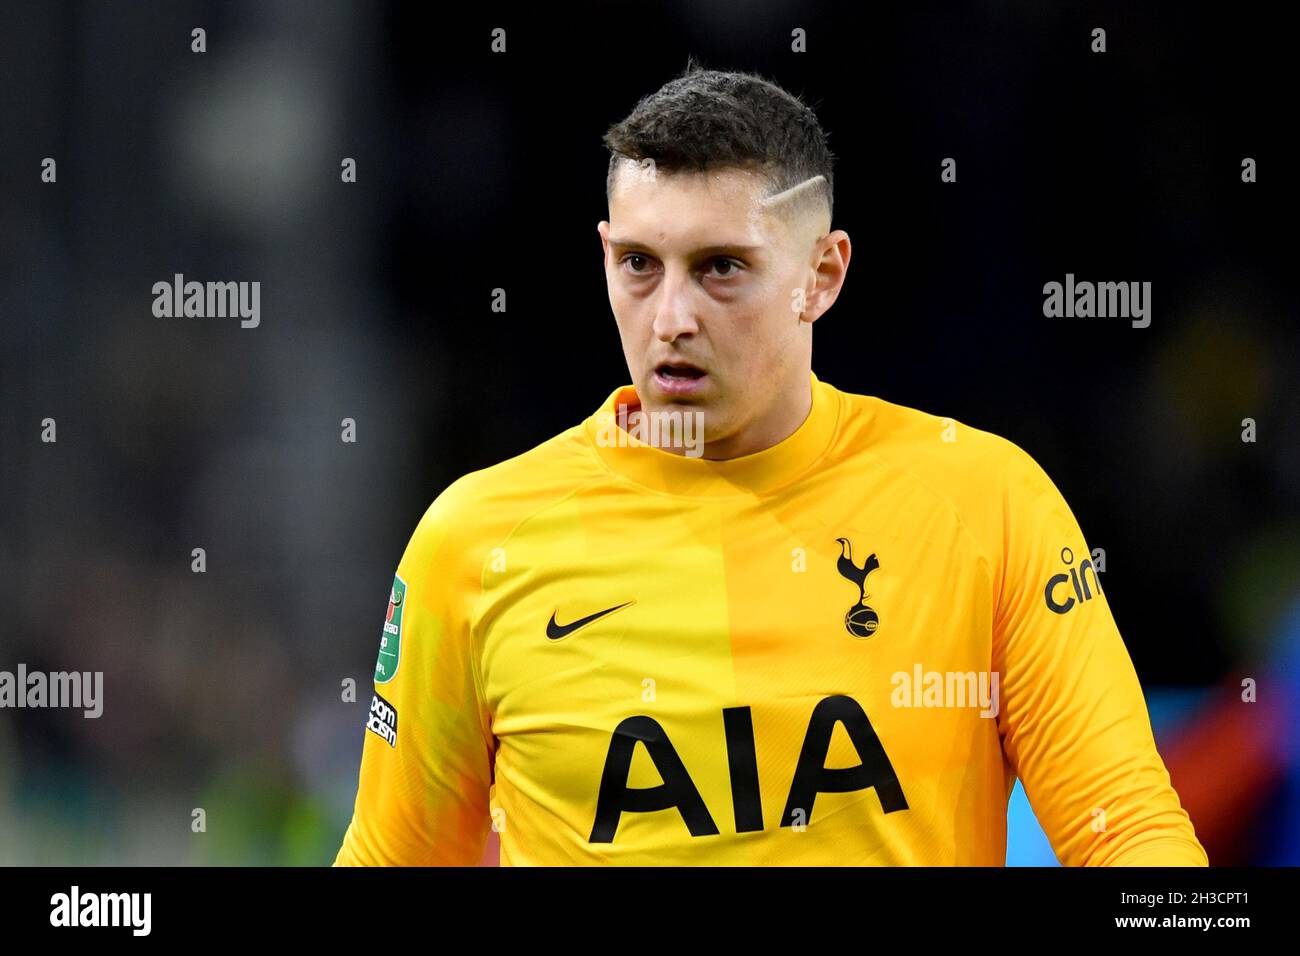 Tottenham Hotspur goalkeeper Pierluigi Gollini during the The EFL Cup match, currently known as the Carabao Cup, between Burnley and Tottenham Hotspur at Turf Moor, Burnley, UK. Picture date: Thursday October 28, 2021. Photo credit should read: Anthony Devlin Stock Photo